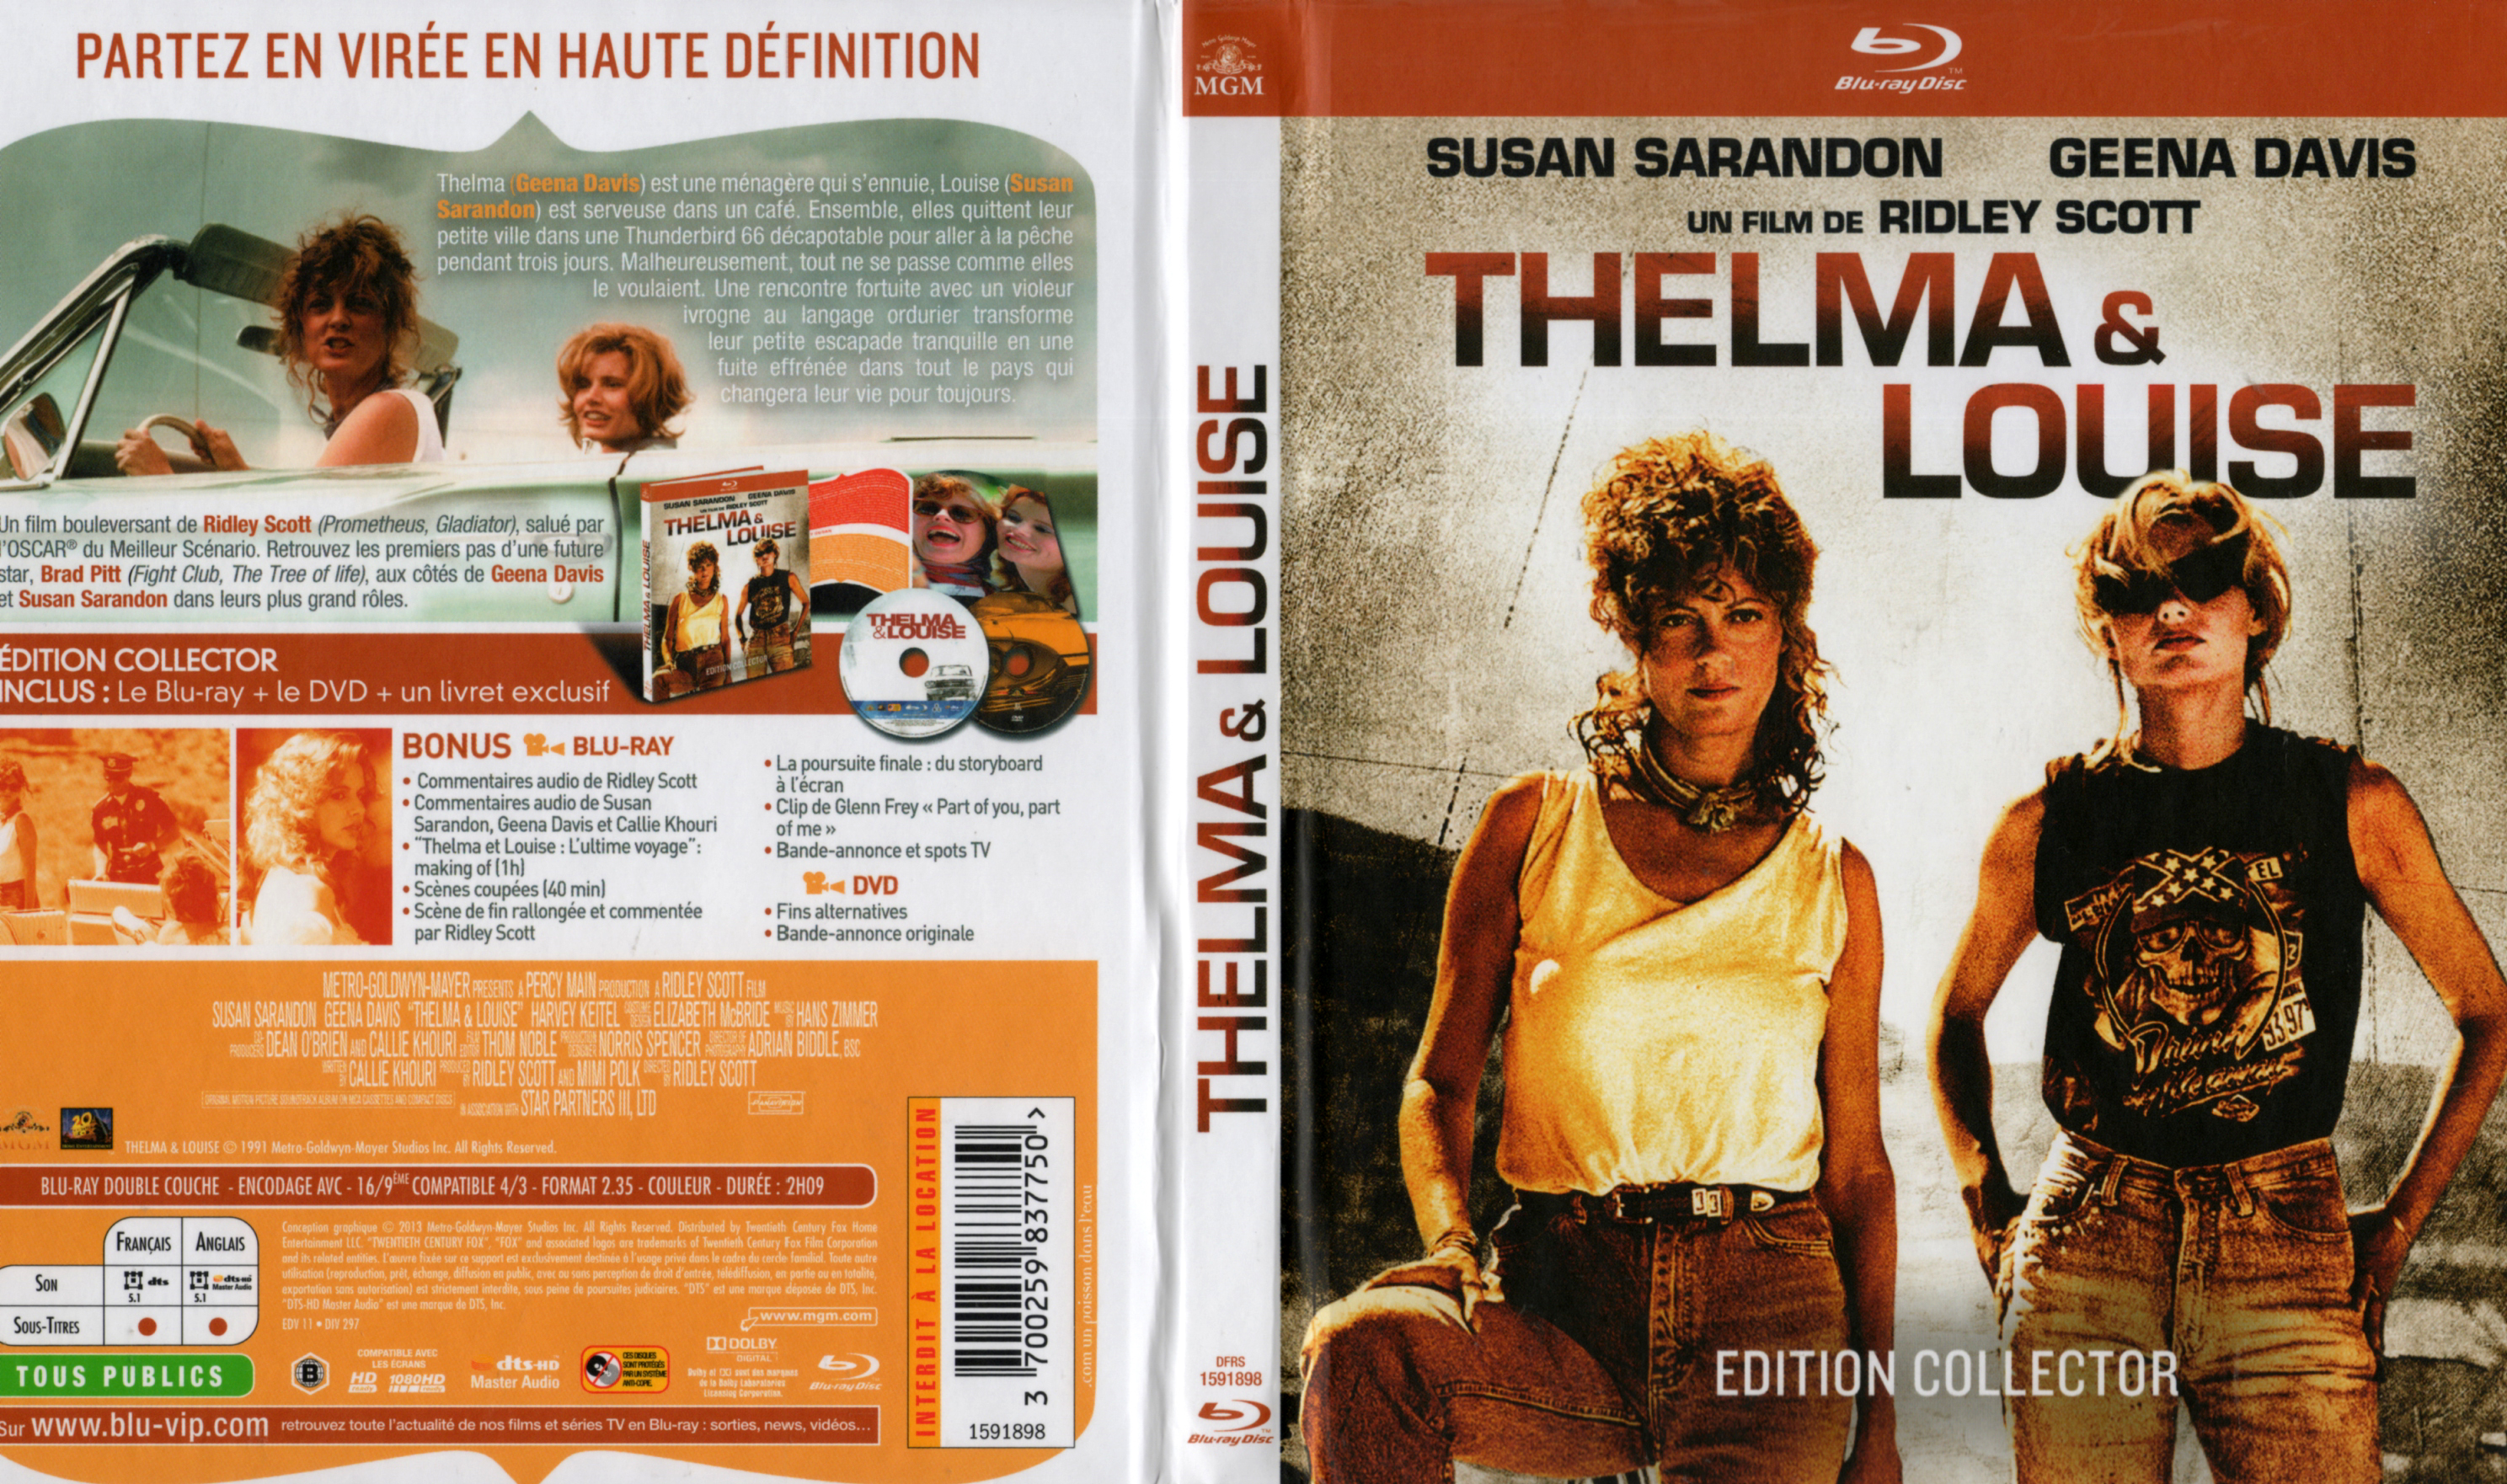 Jaquette DVD Thelma et Louise (BLU-RAY) v2